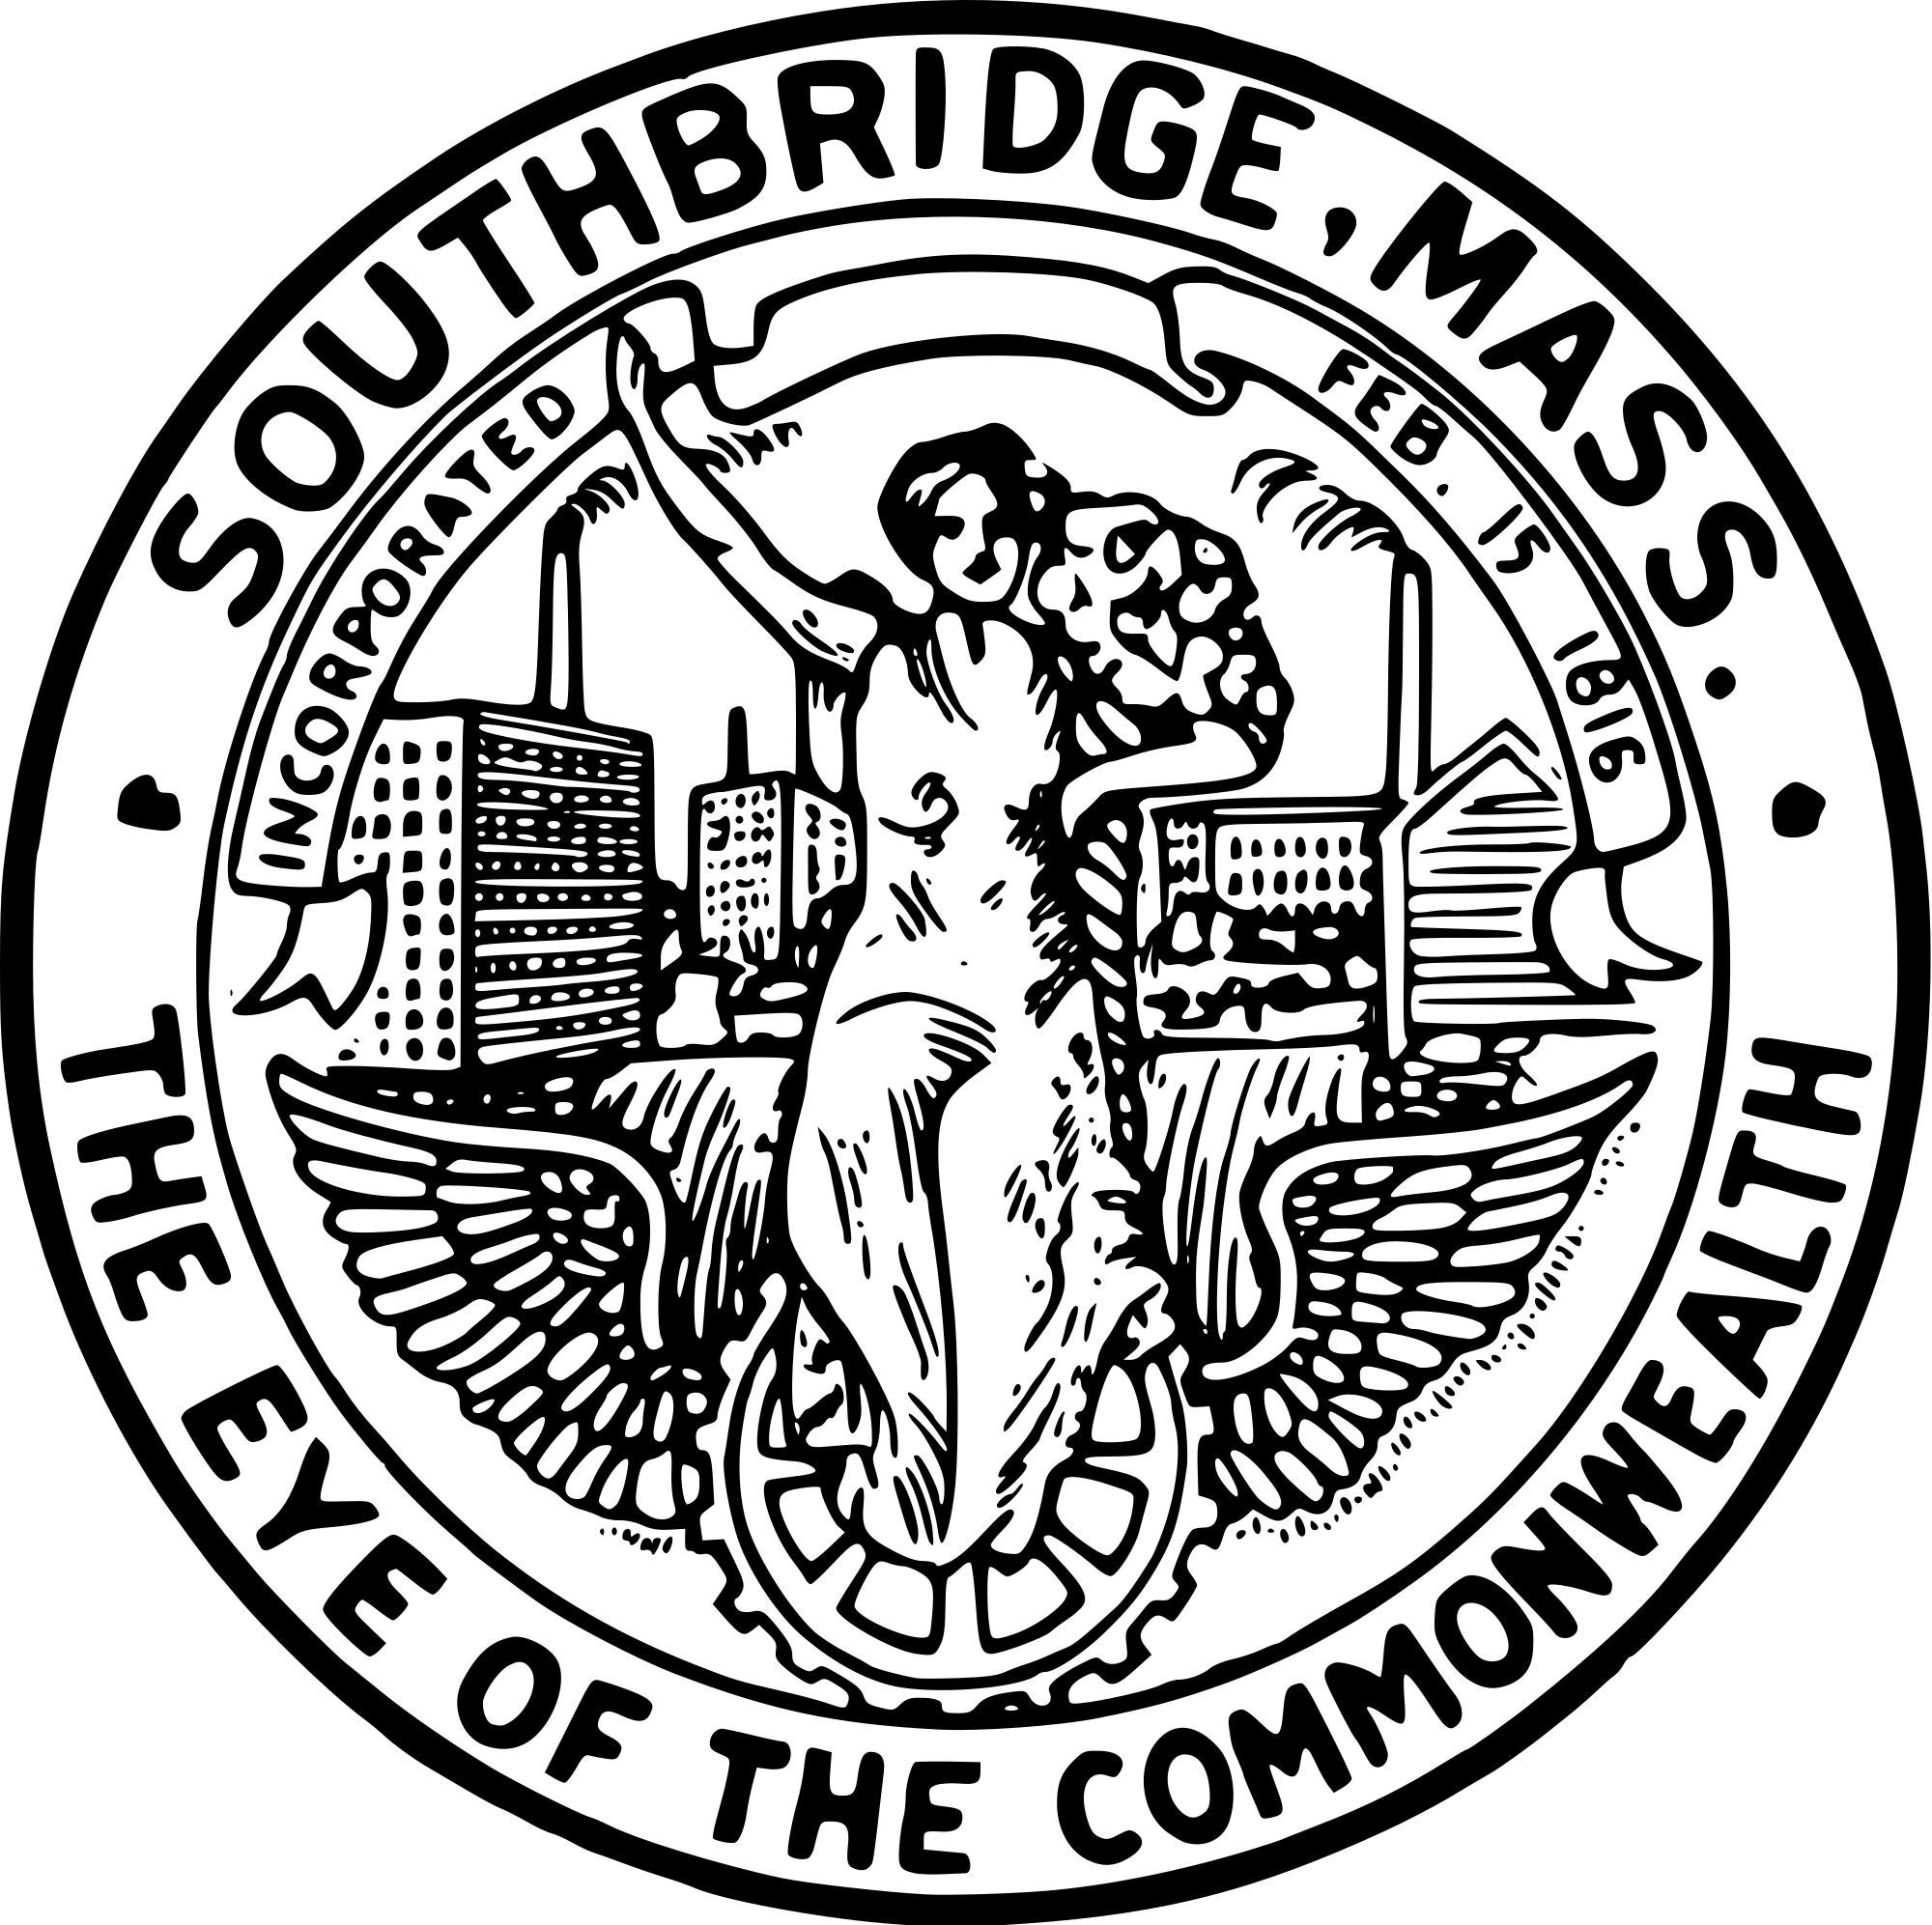 Southbridge mass tax the. Information clipart information report